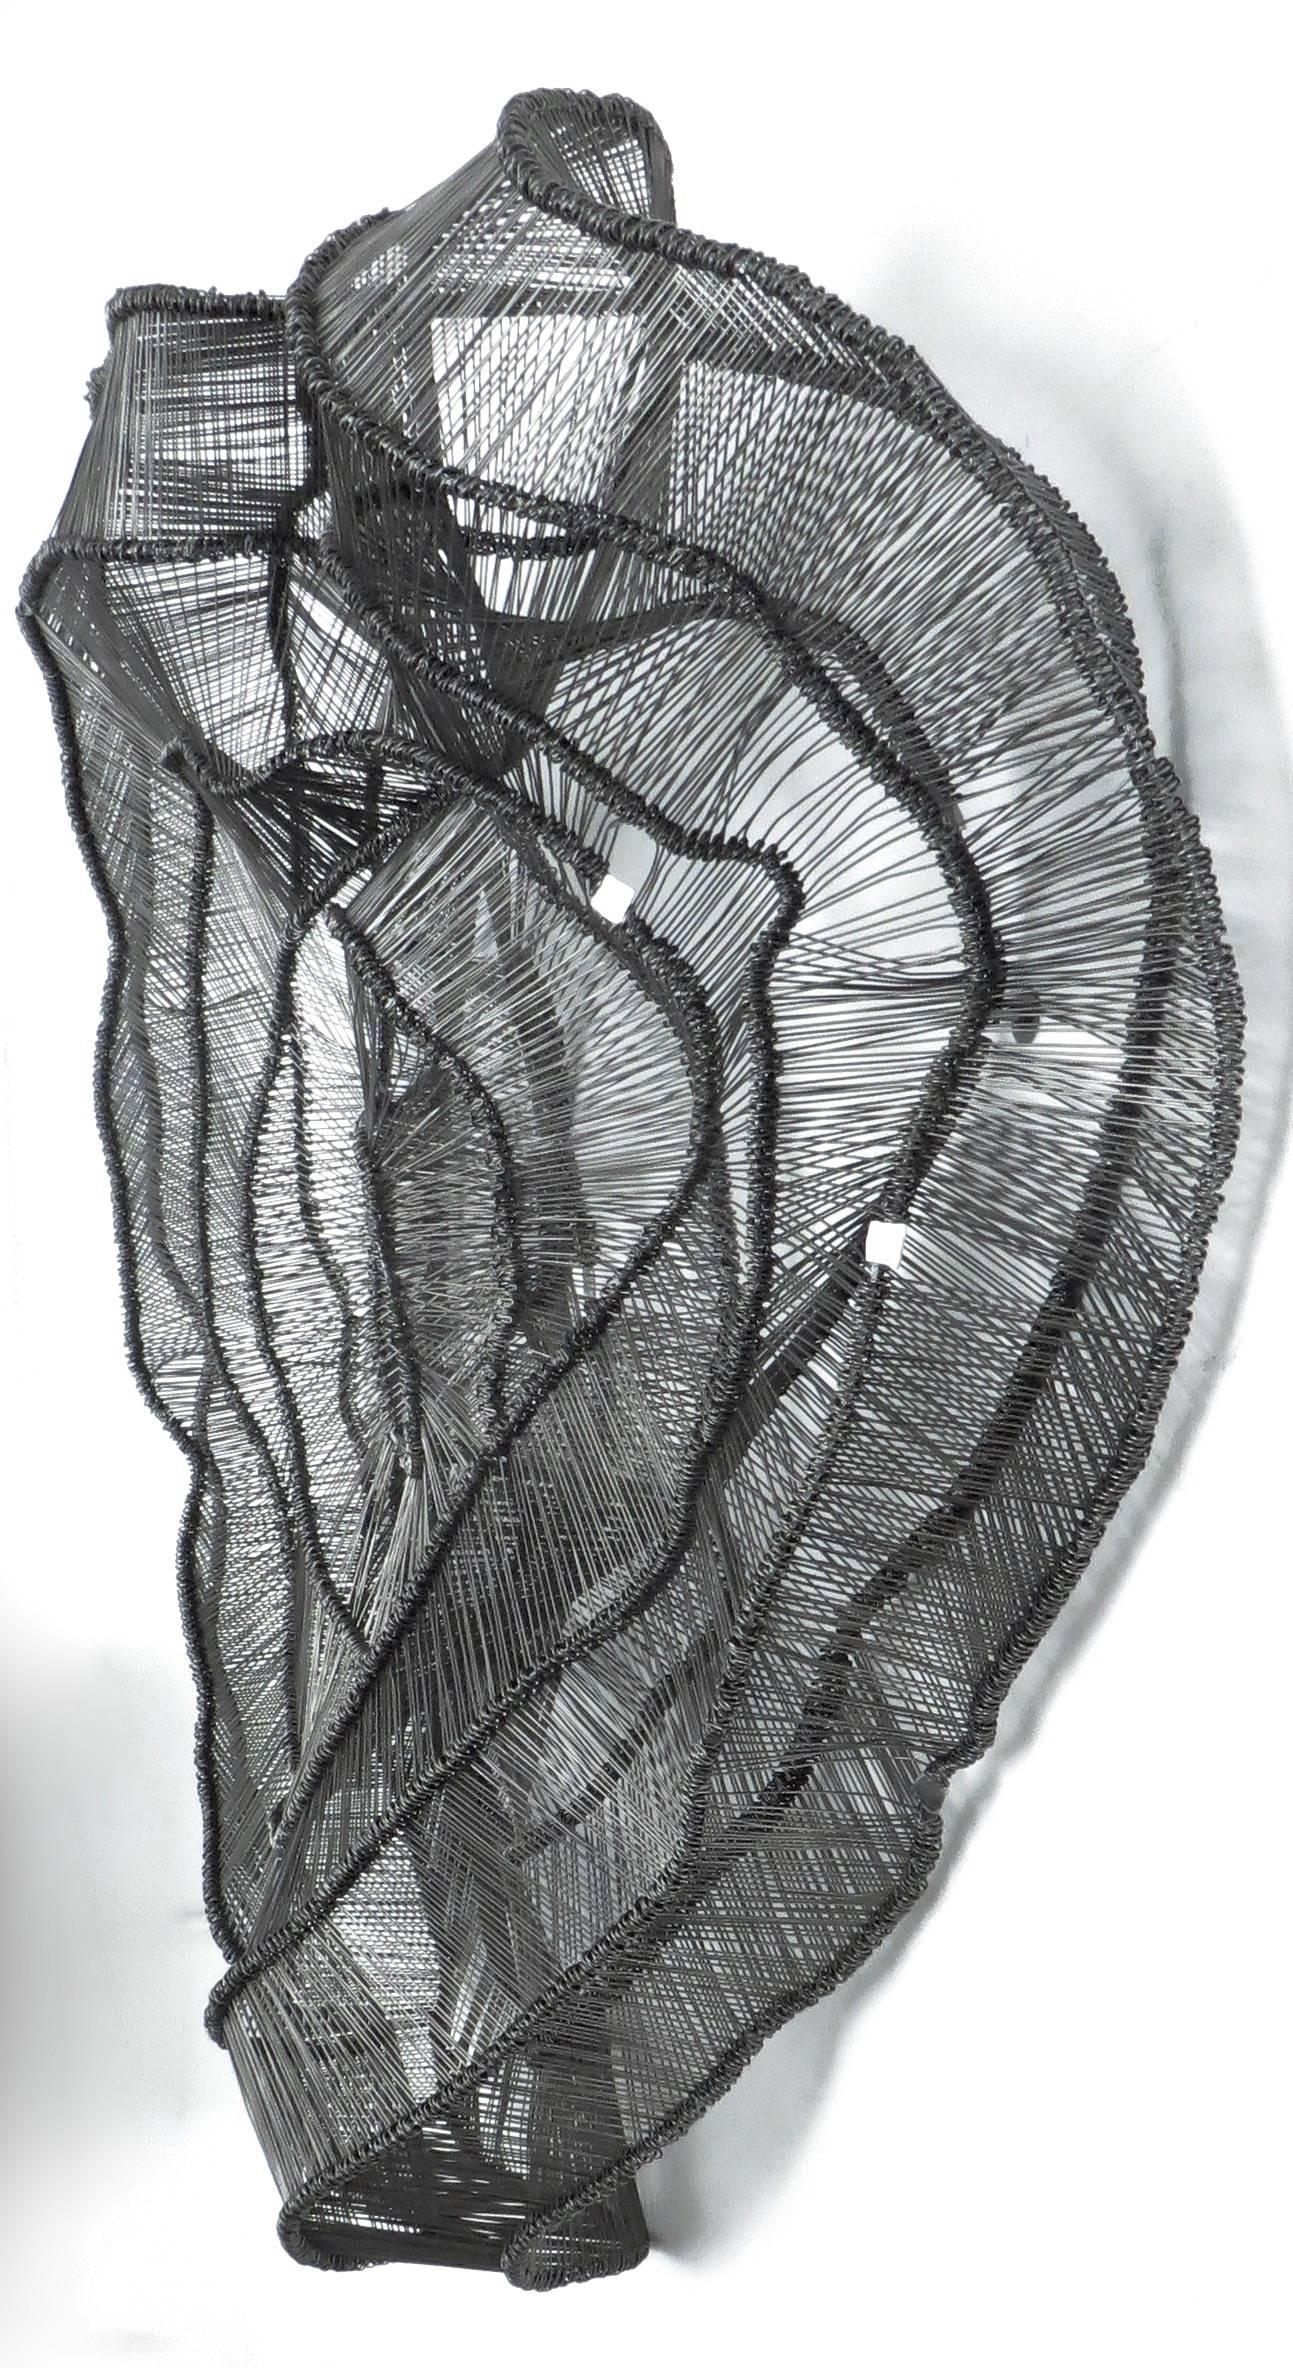 Eric Gushee woven wire metal wall sculpture in black and gray from the Emergence series. 
Large undulating metal woven wire that undulates from the wall.
From the most recent new work. 
Available now. 
Eric Gushee is an artist living and working